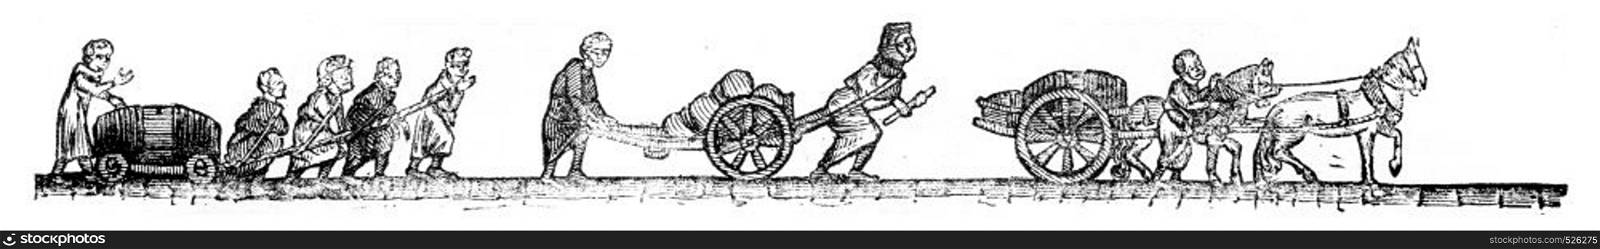 Sled, Handcart, Dray wine, vintage engraved illustration. Magasin Pittoresque 1846.